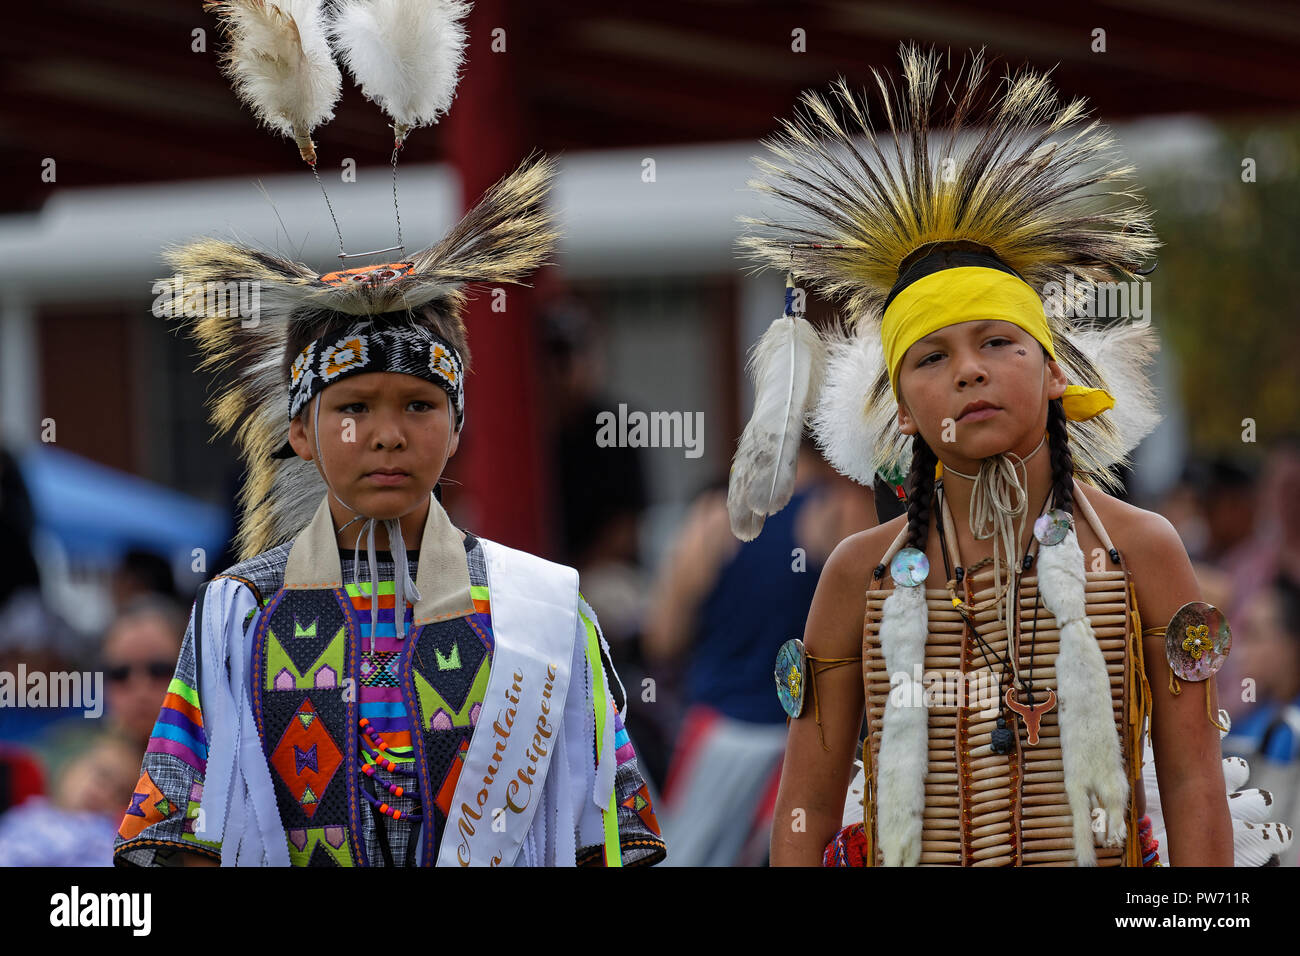 BISMARK, NORTH DAKOTA, September 9, 2018 : Sioux children at the 49th annual United Tribes Pow Wow, one large outdoor event that gathers more than 900 Stock Photo